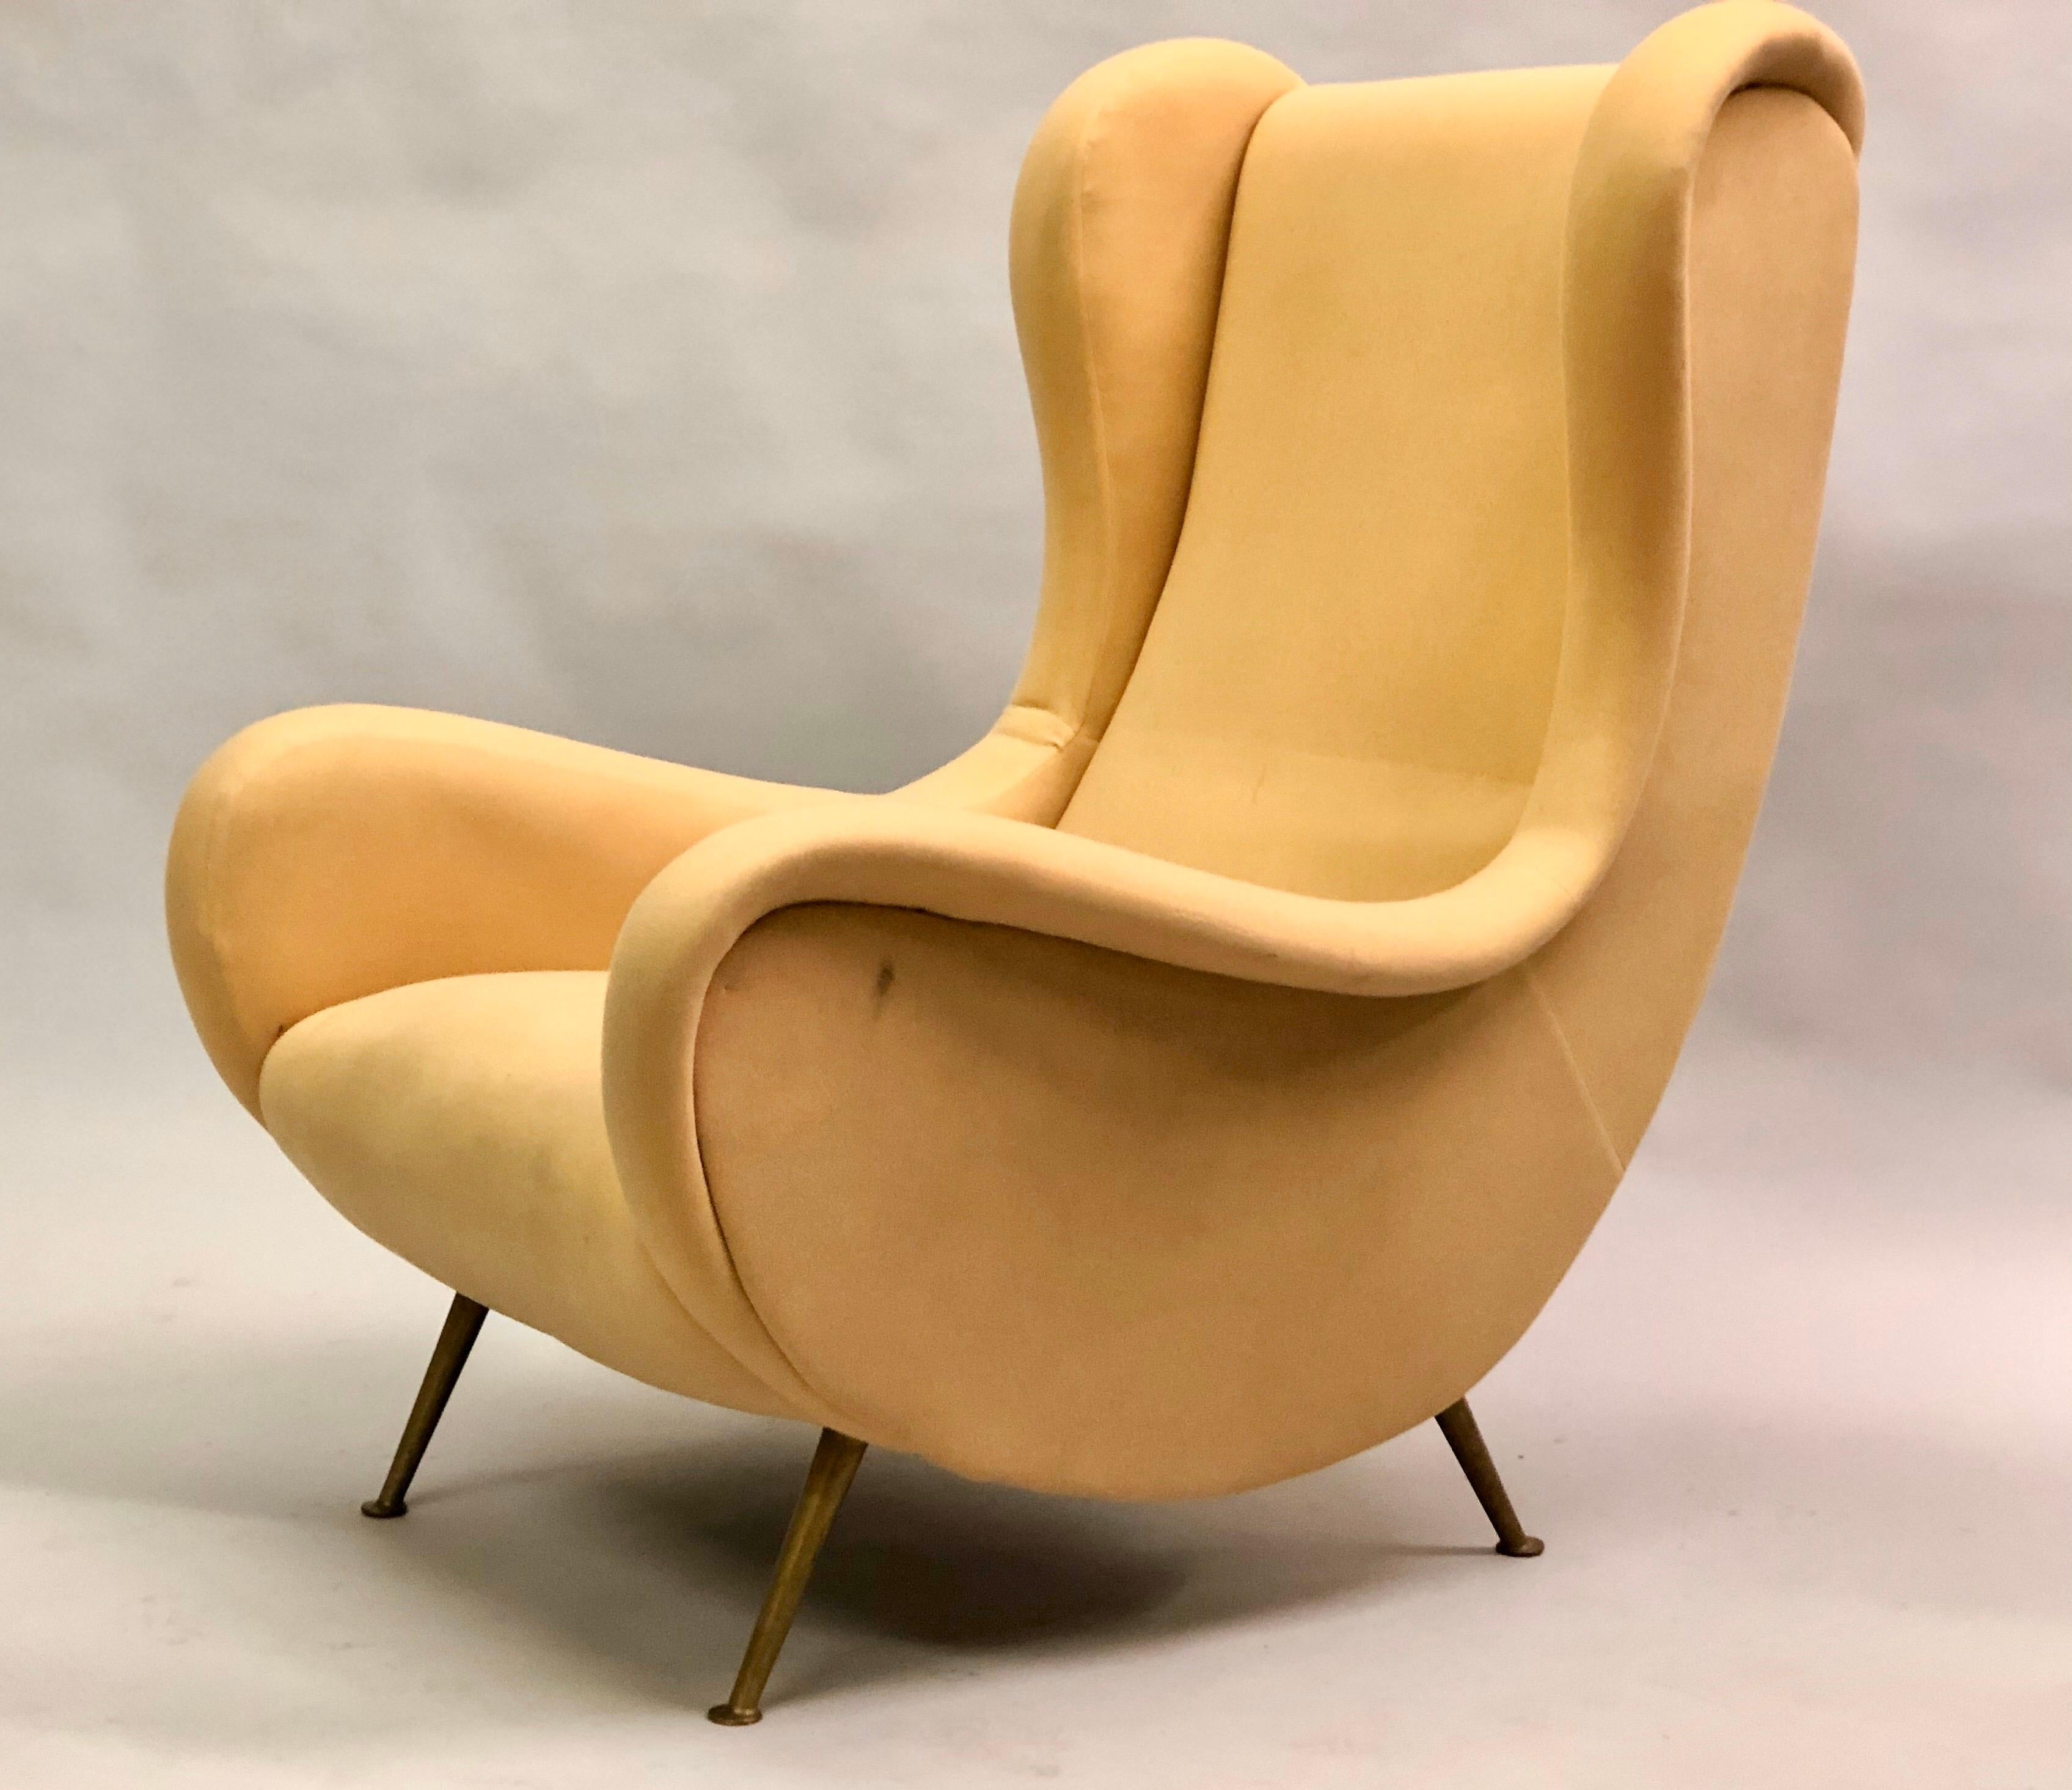 Mid-20th Century Vintage Pair of Italian 'Senior Chairs' / Lounge Chairs, Marco Zanuso Style For Sale